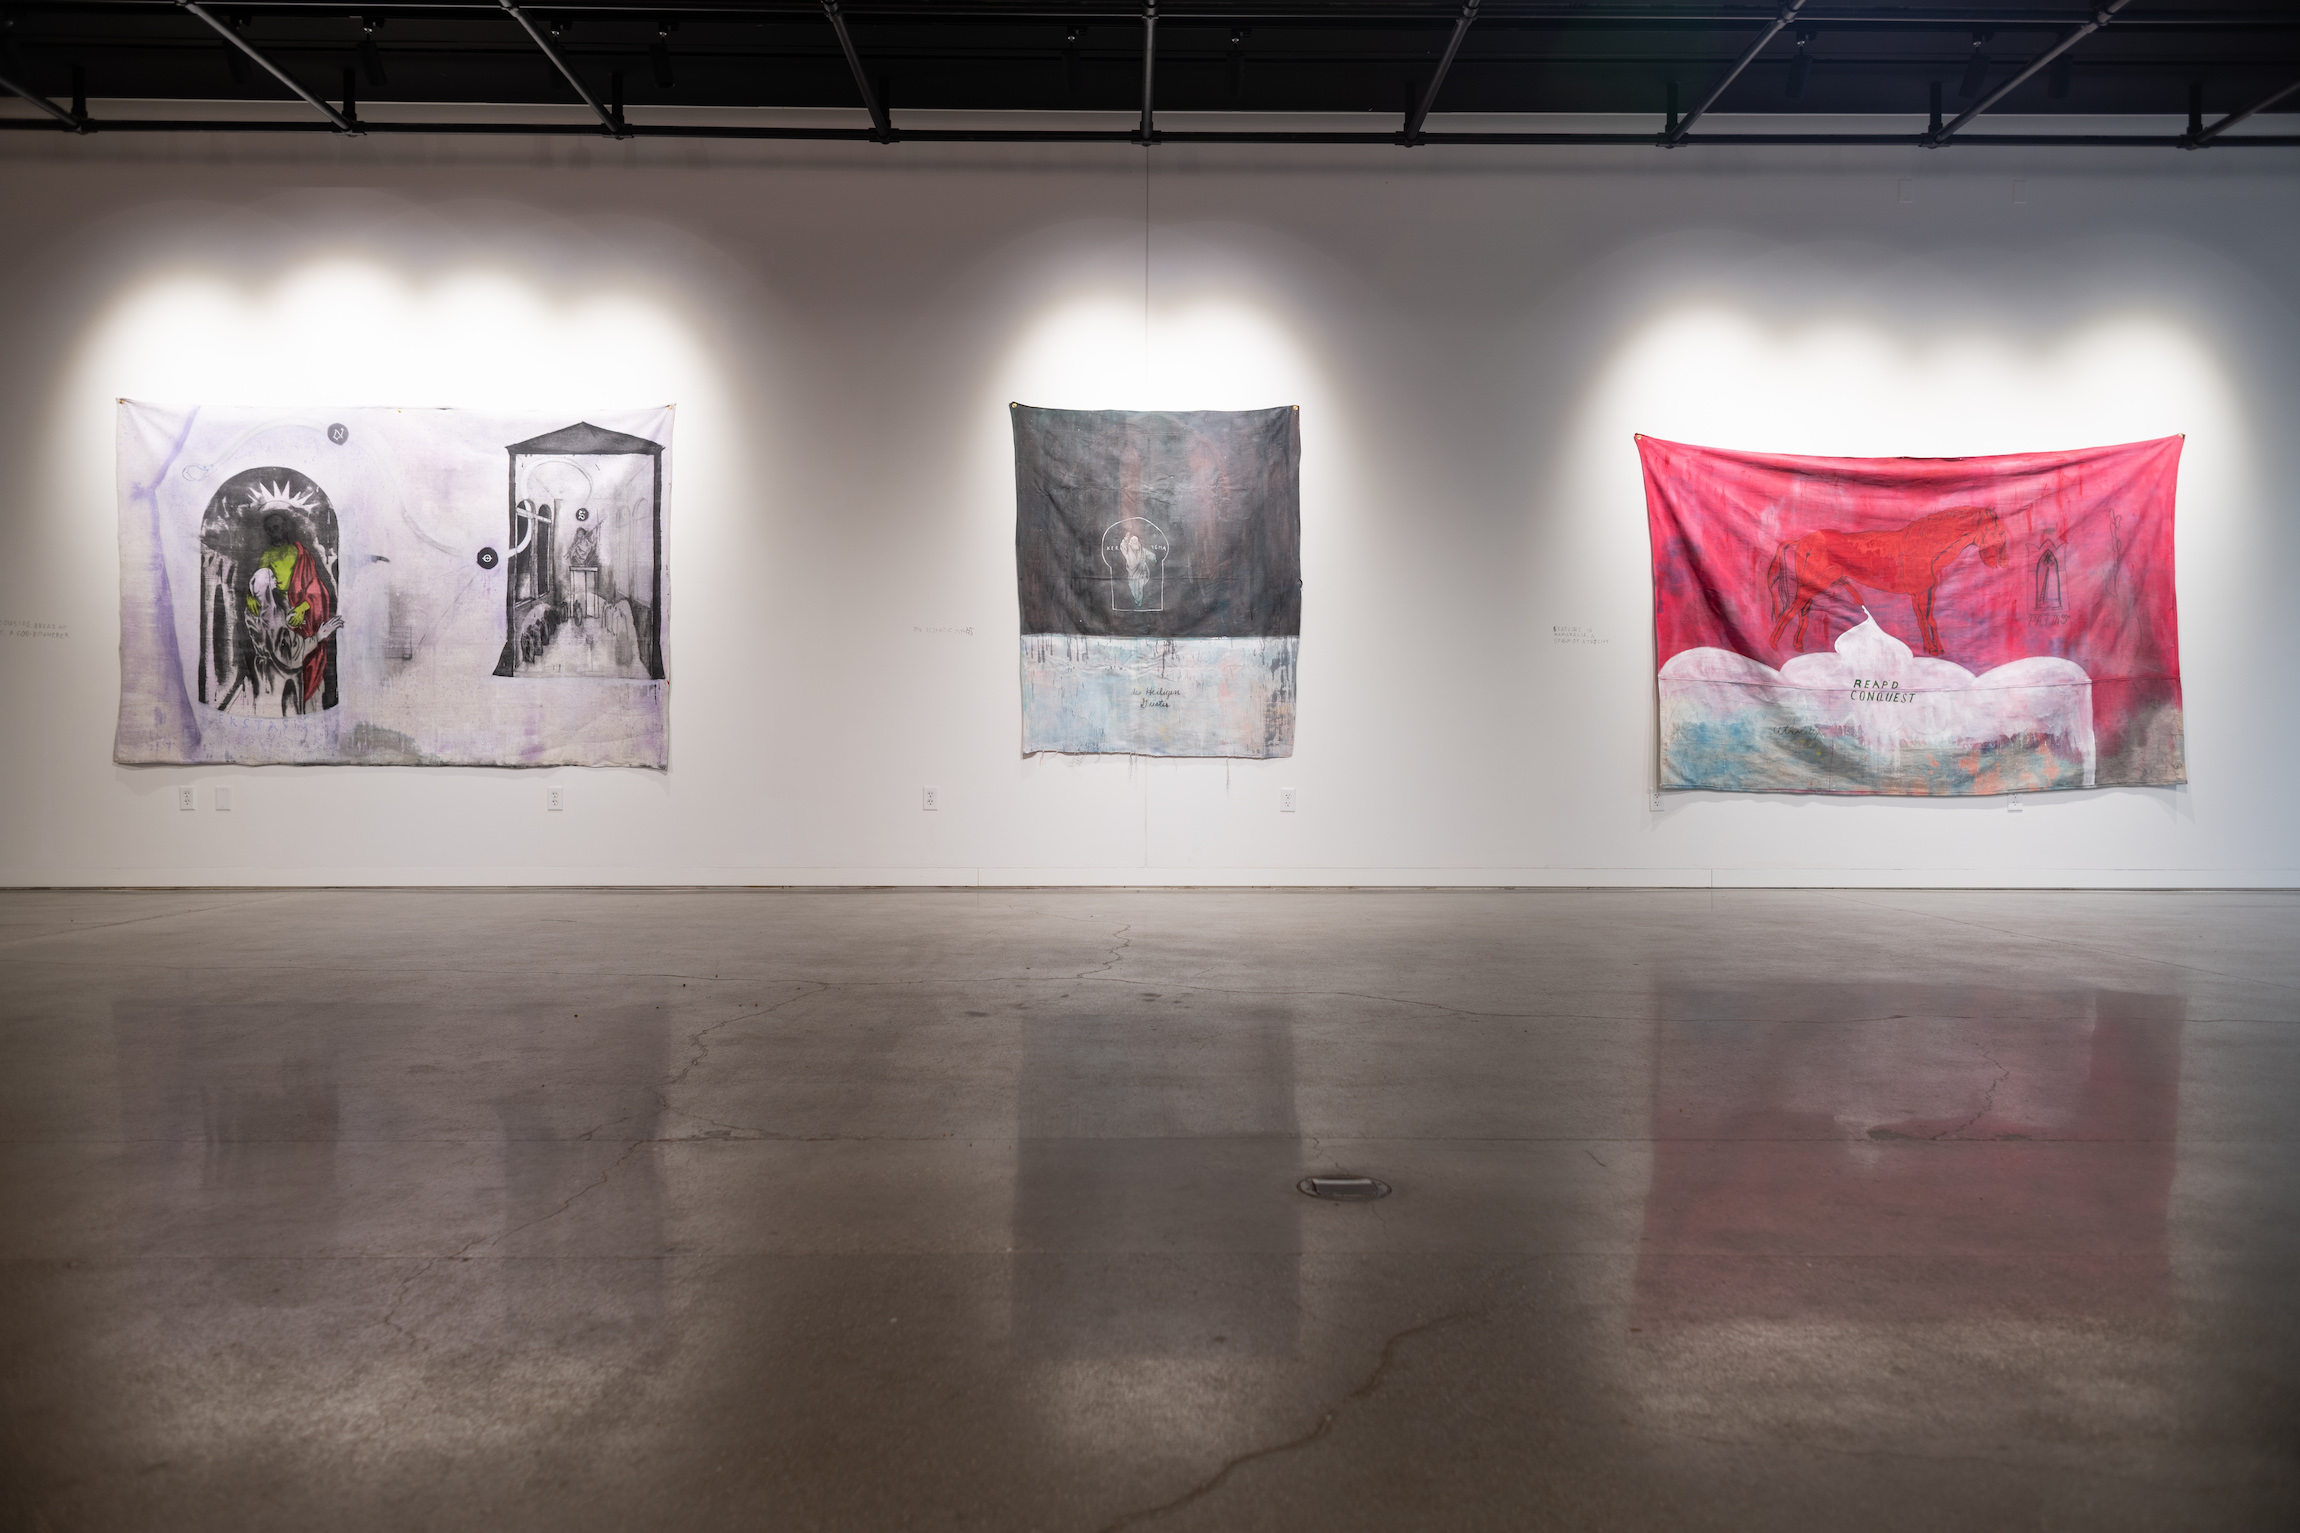 Installation view of Justin Bergin's Master of Fine Arts exhibition Sacrament at the Art Lofts Gallery, University of Wisconsin-Madison. Photography by Kyle Herrera.